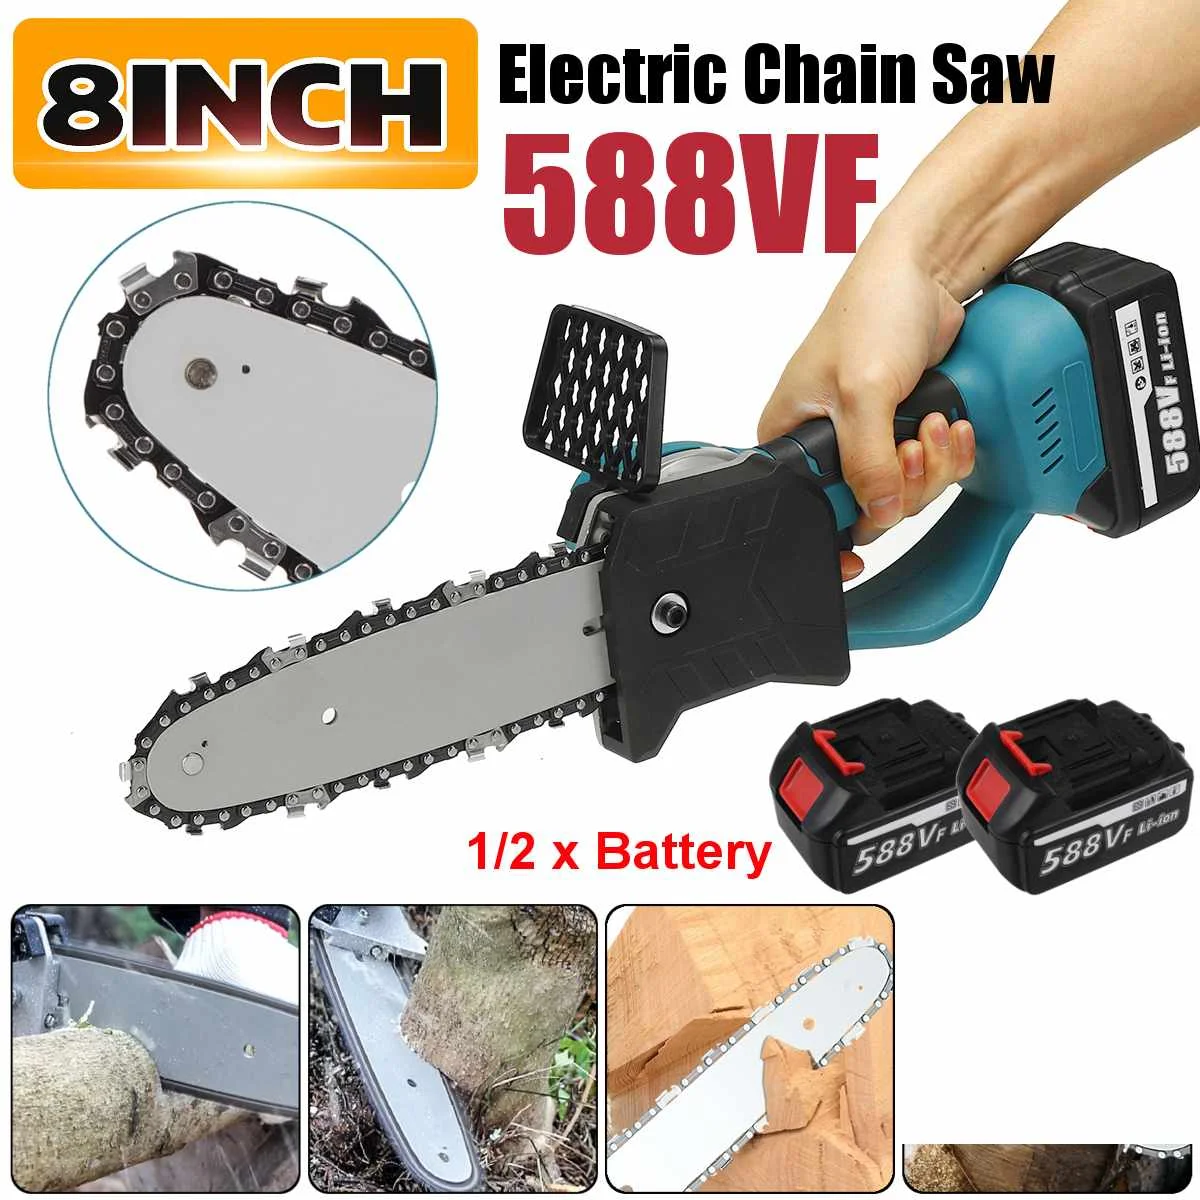 

NEW 3000W 8 Inch Rechargeable Cordless Electric Saw Chainsaw Brushless Motor Woodworking Cutter Tool With 1/2X 22980mAh Battery